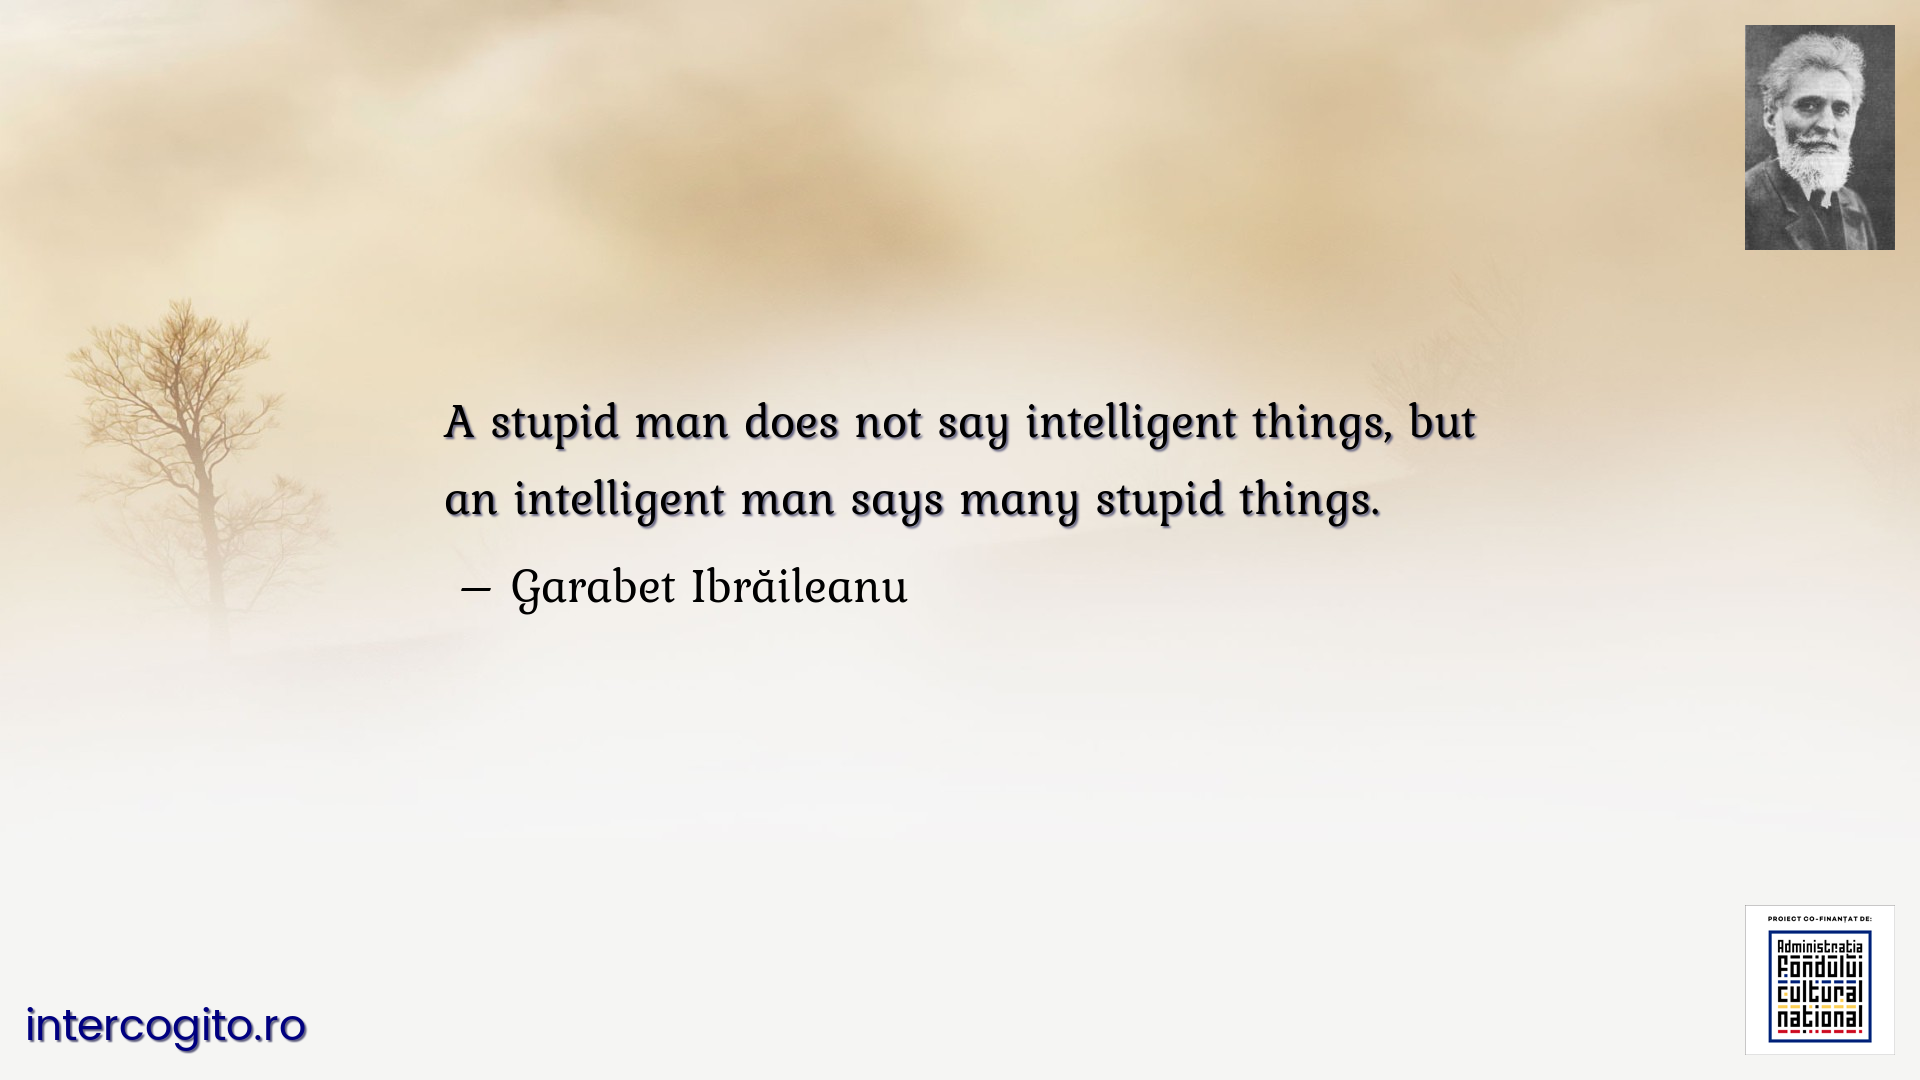 A stupid man does not say intelligent things, but an intelligent man says many stupid things.